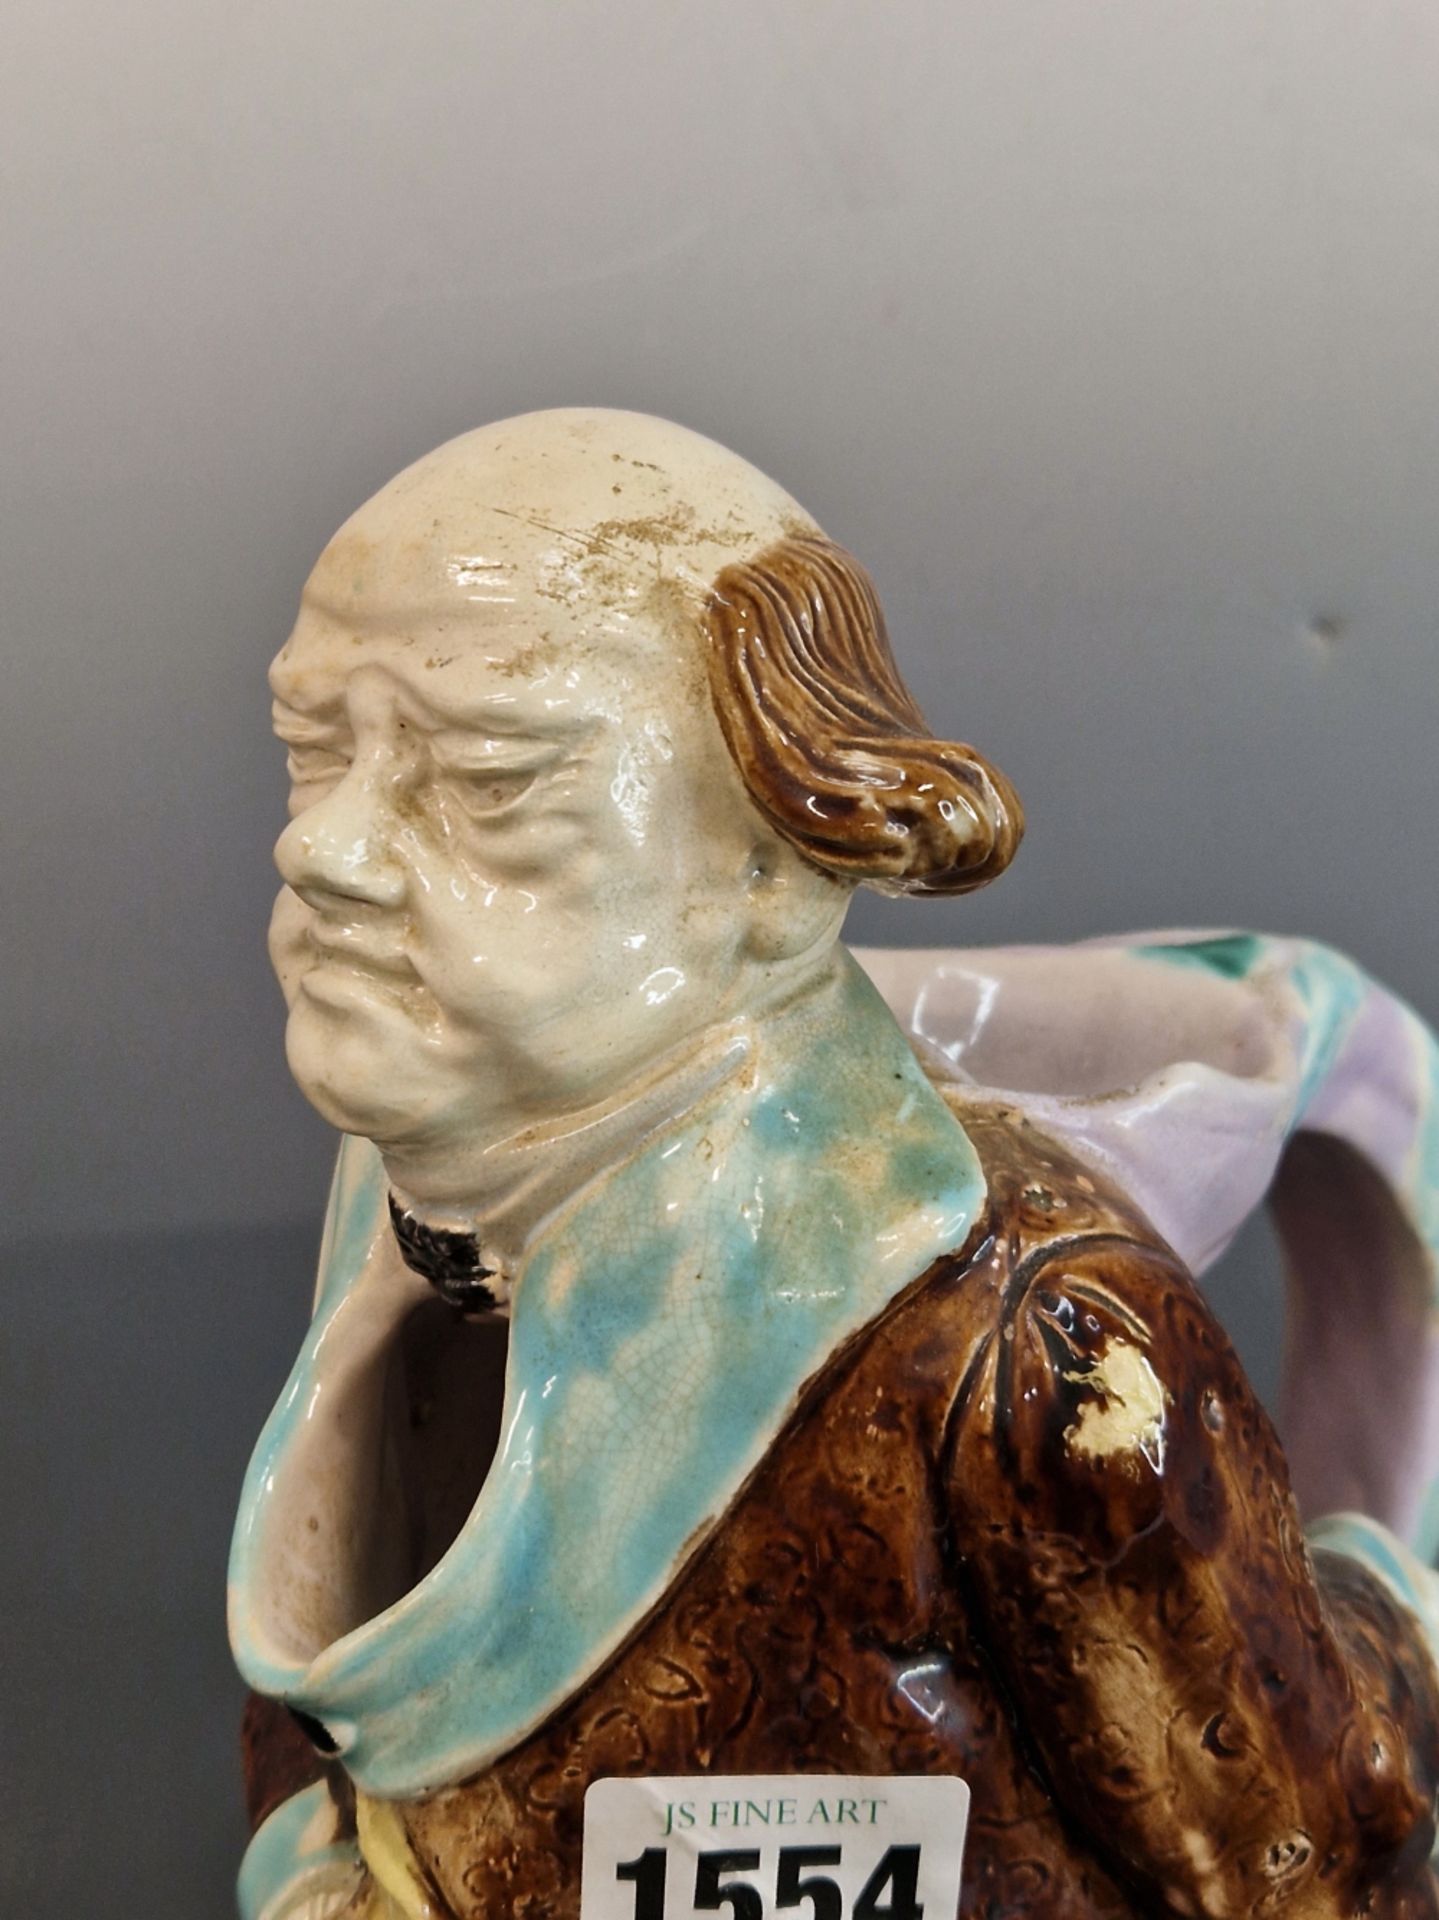 ATTRIBUTED TO SARREGUEMINES, A MAJOLICA JUG MODELLED AS A GENTLEMAN WEARING A TURQUOISE TRIMMED - Image 2 of 5